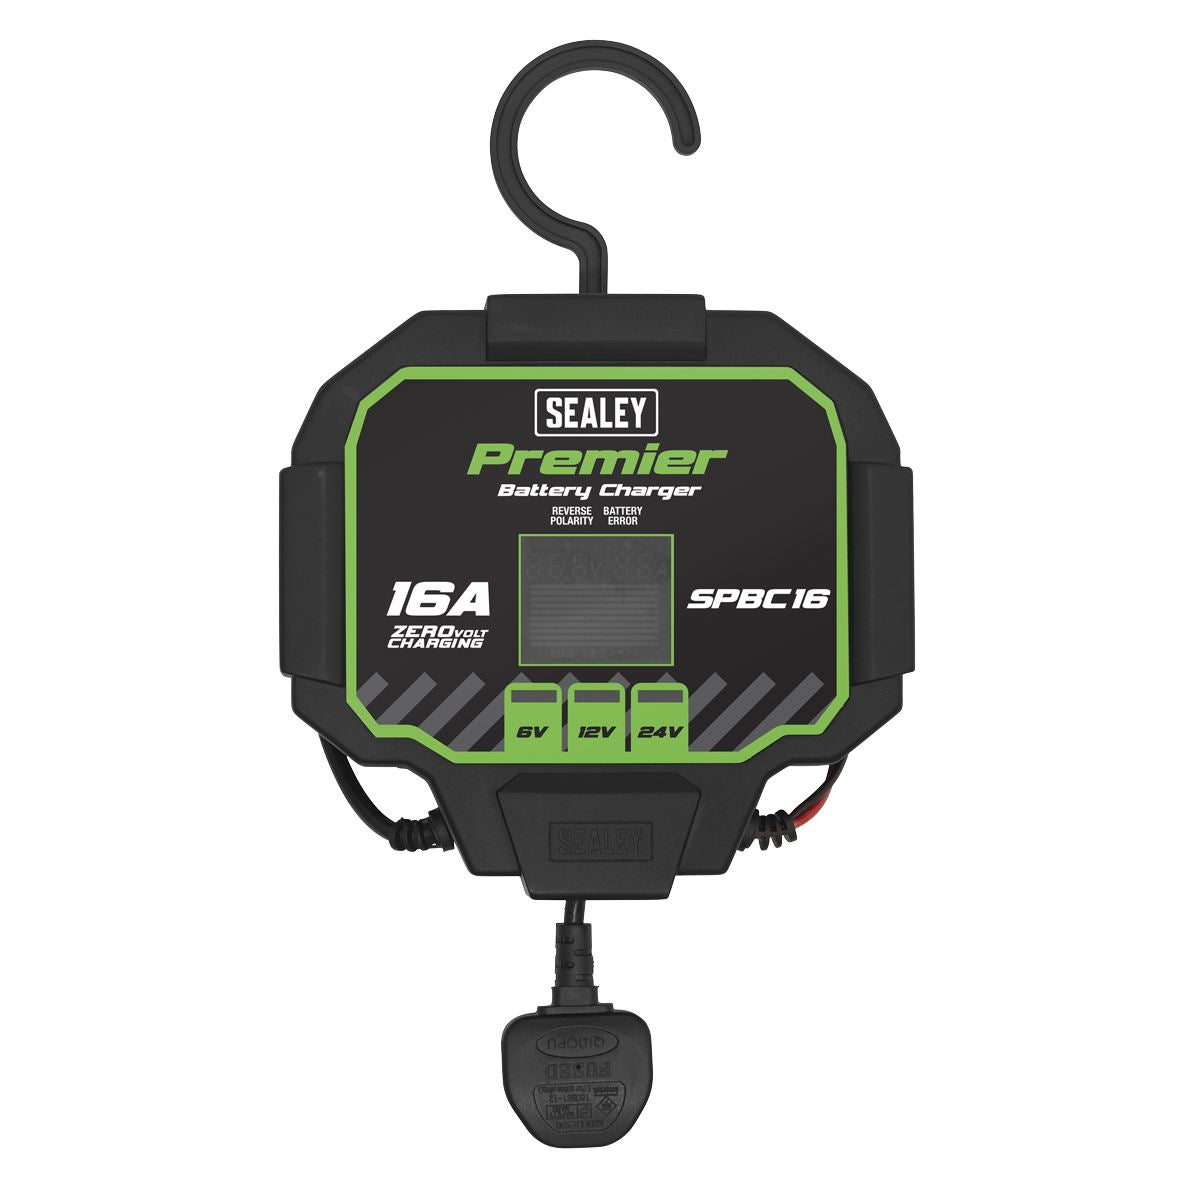 Sealey Premier Battery Maintainer Charger 16A Fully Automatic